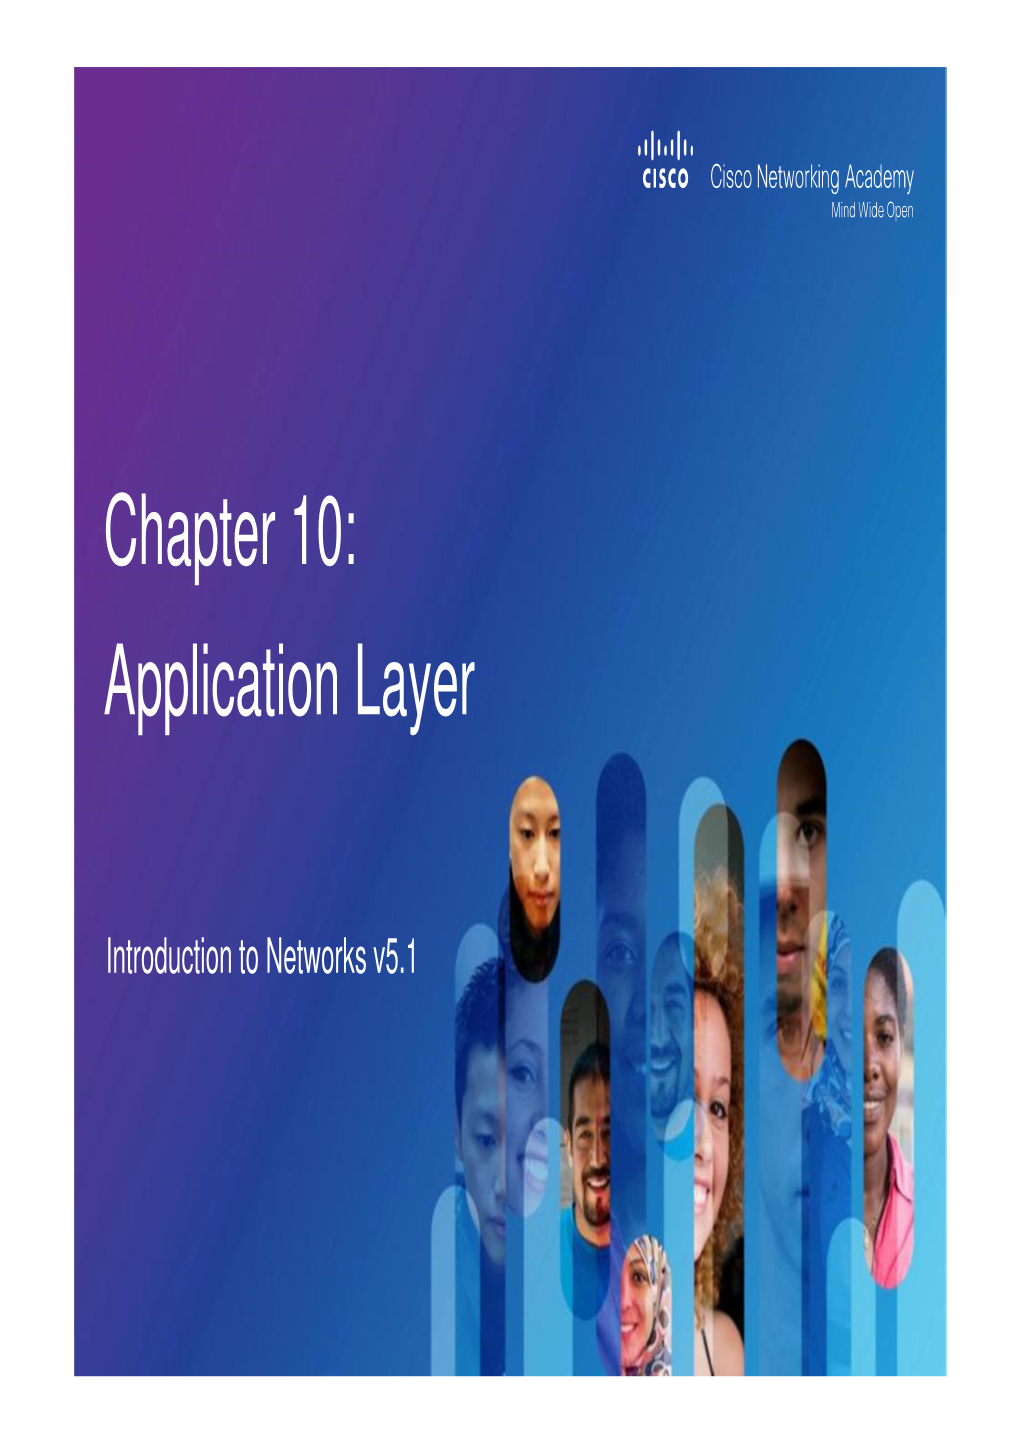 Chapter 10: Application Layer